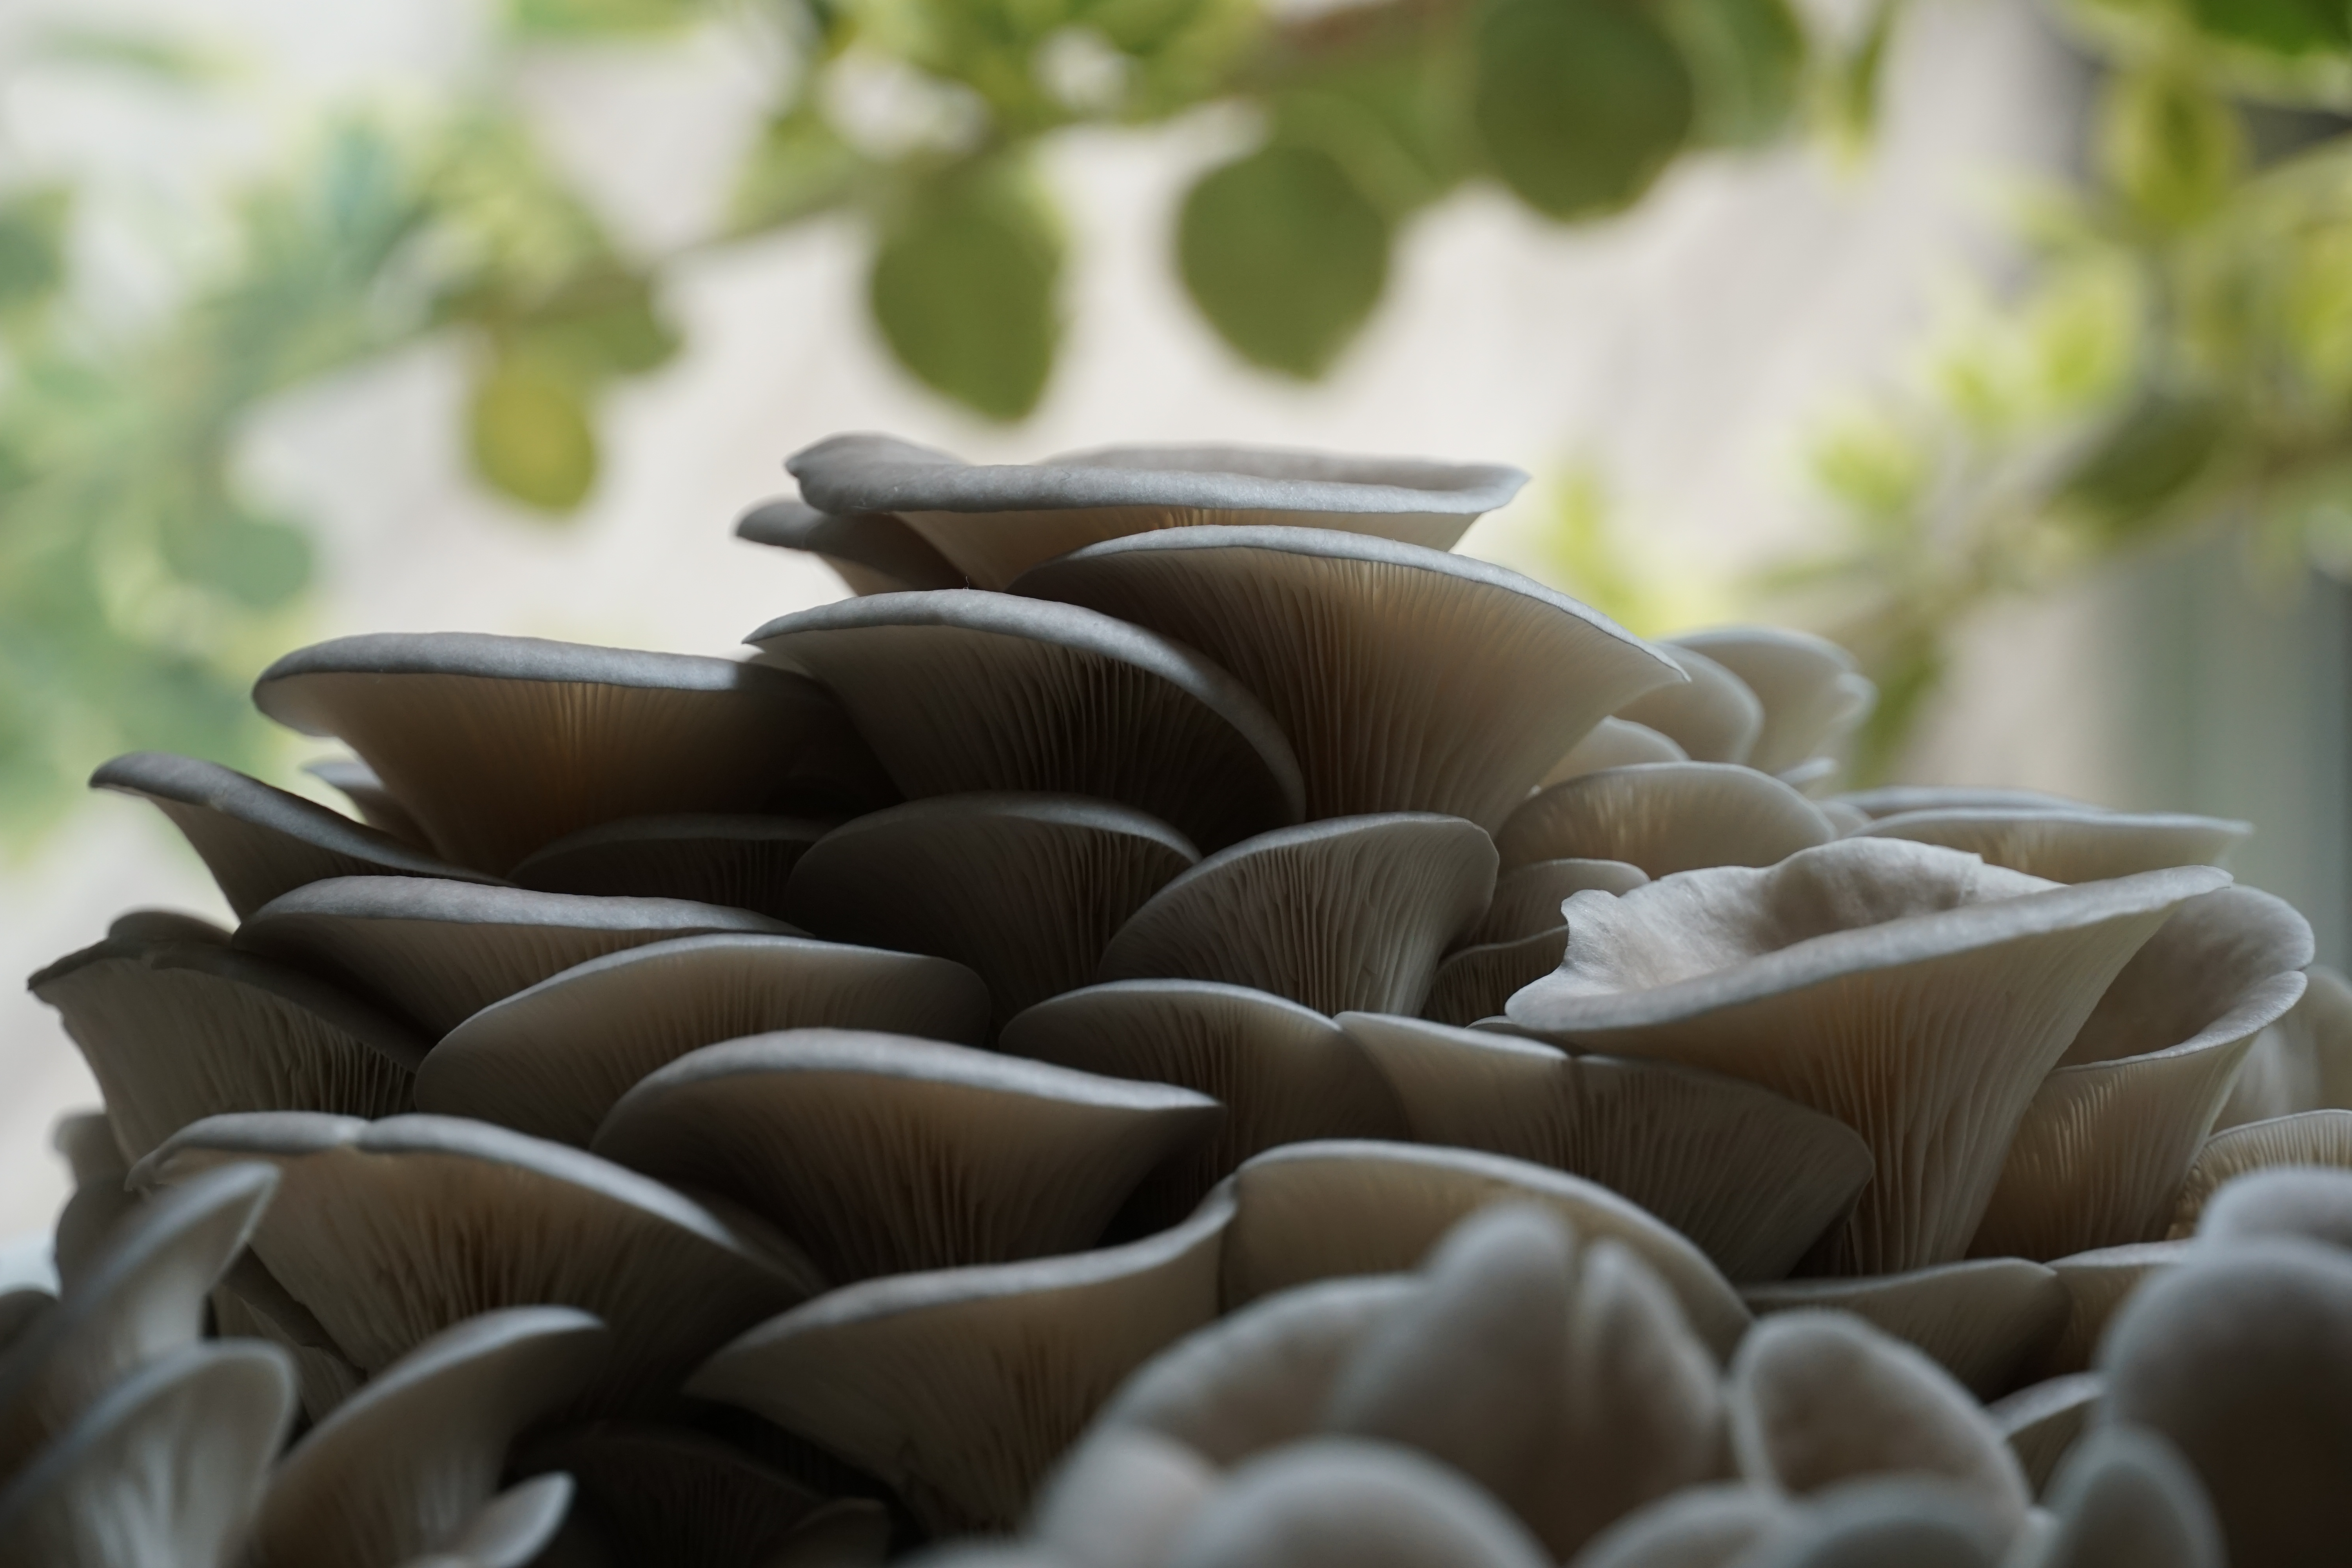 Mushroom Magic: Our Journey to a Bountiful Harvest